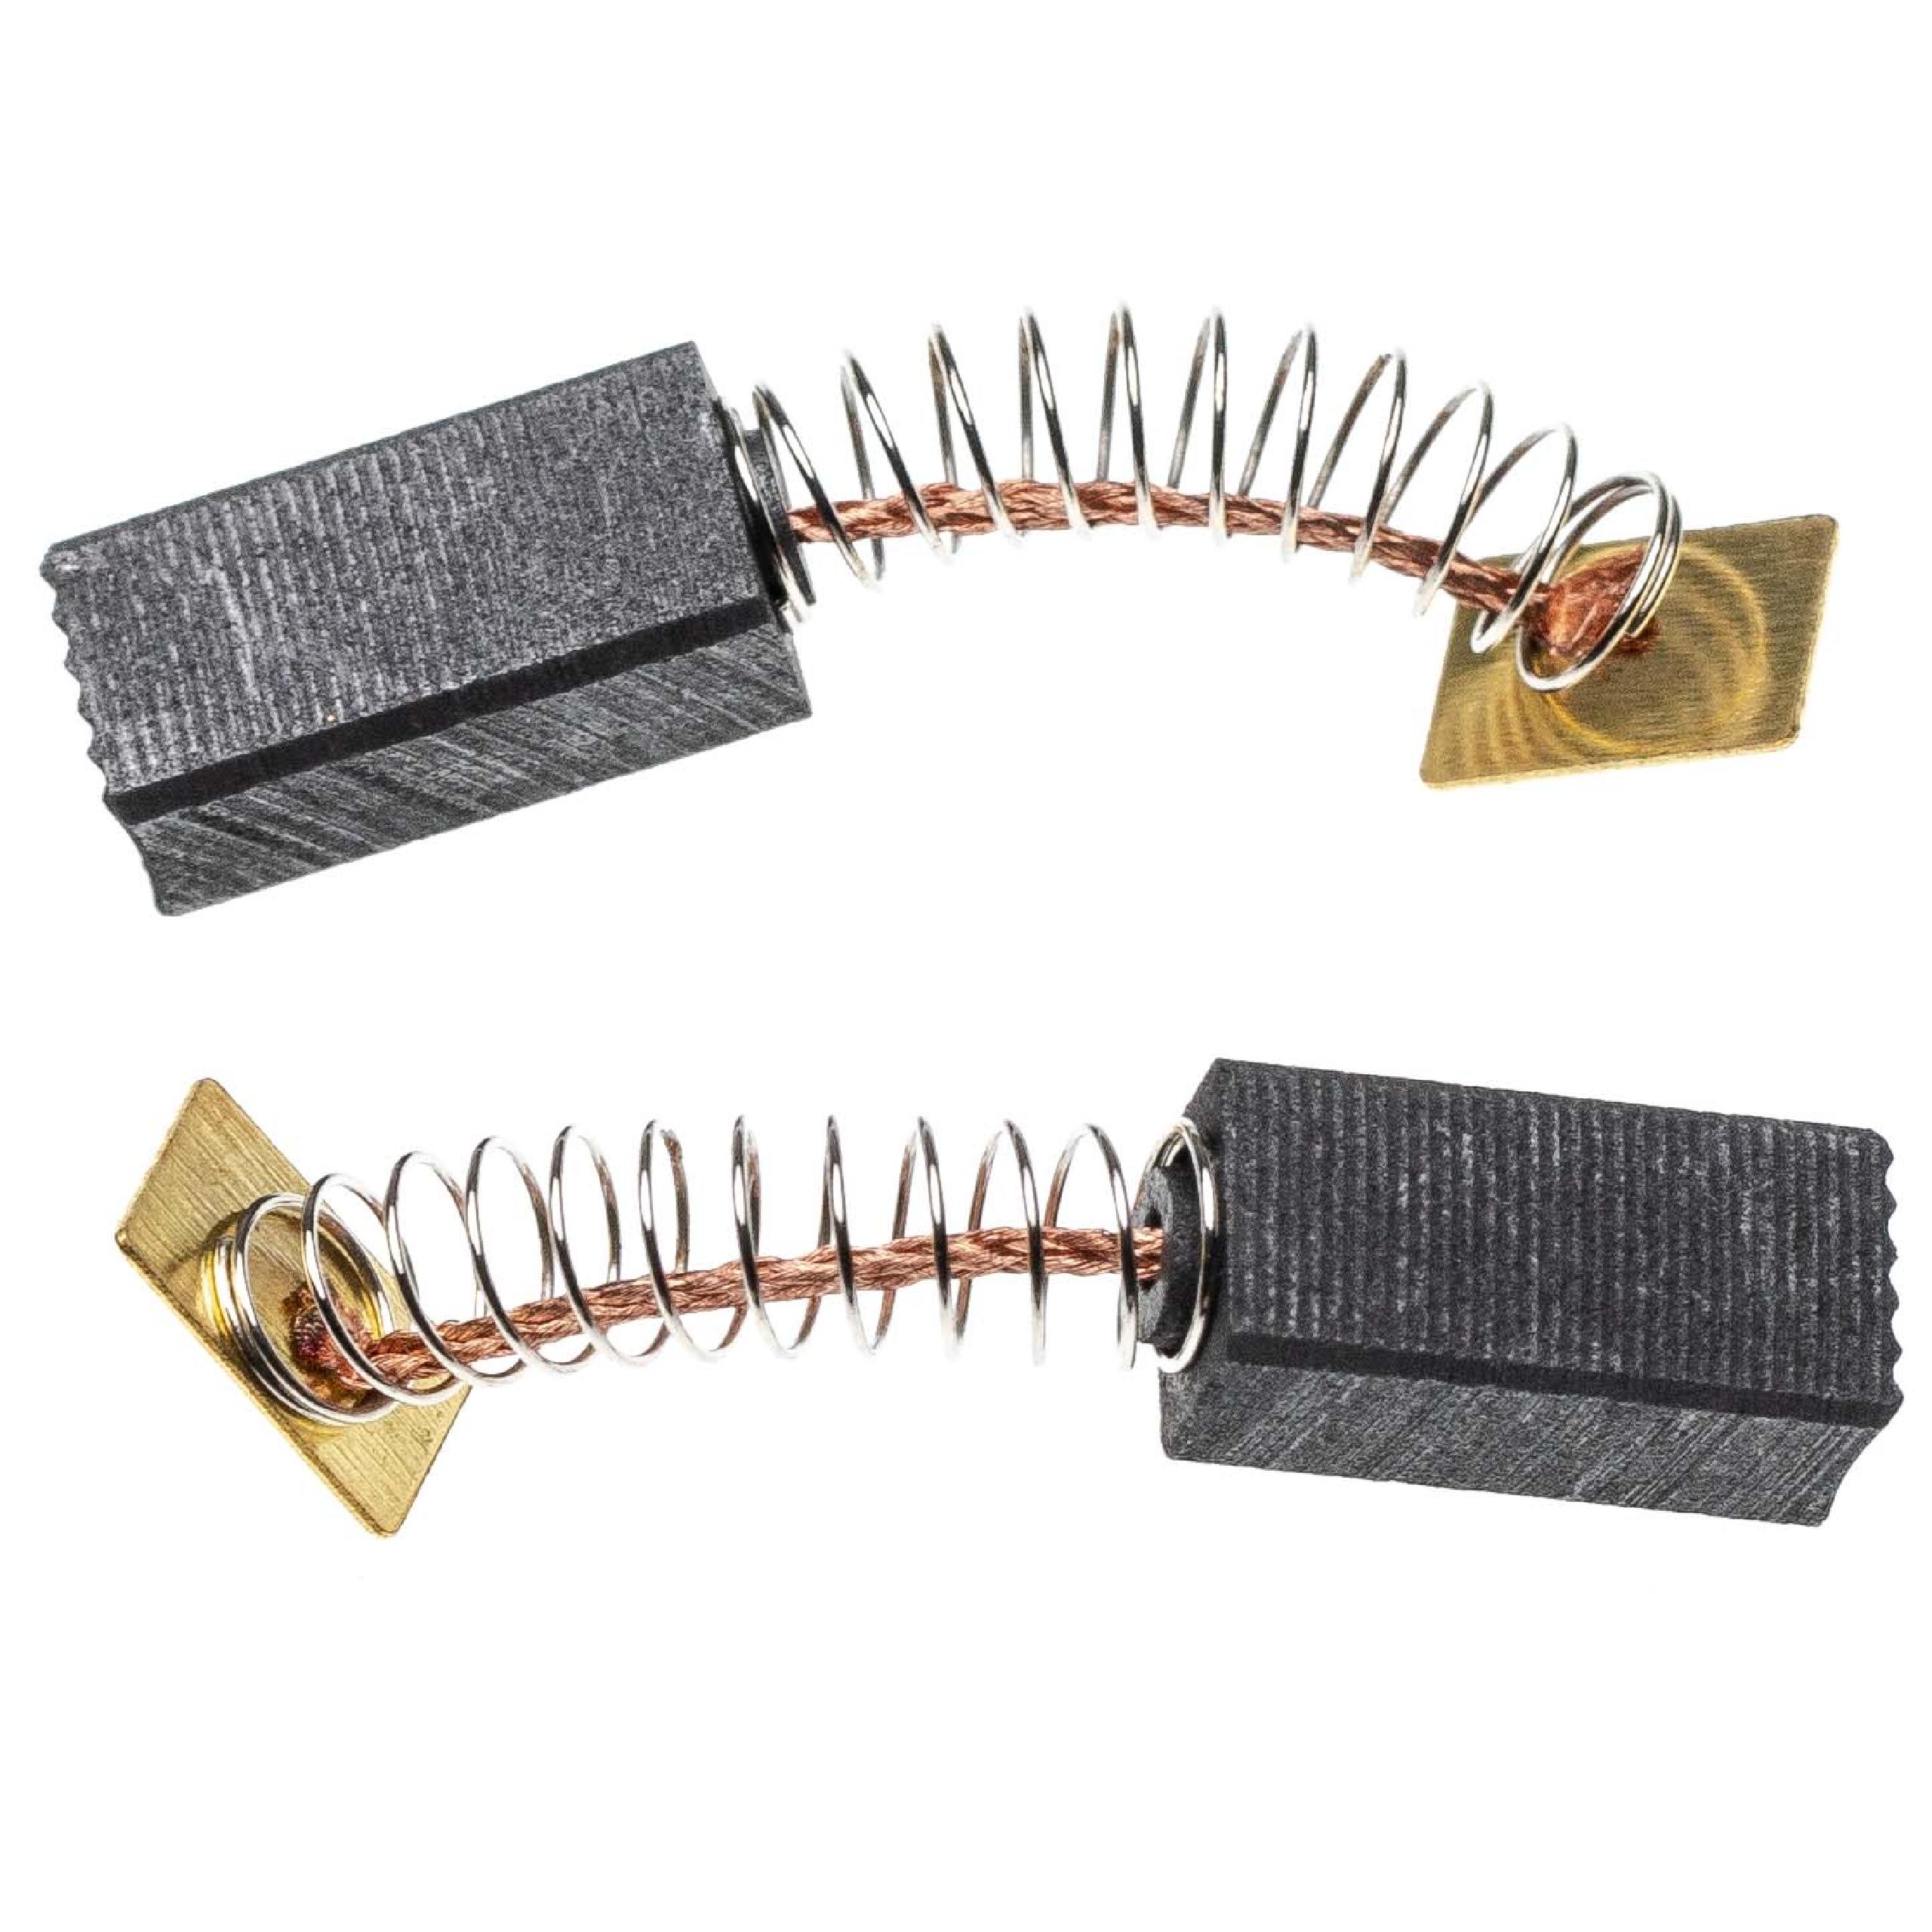 2x Carbon Brush as Replacement for AEG SMA1029 Electric Power Tools + Spring, 17 x 8 x 6.25mm